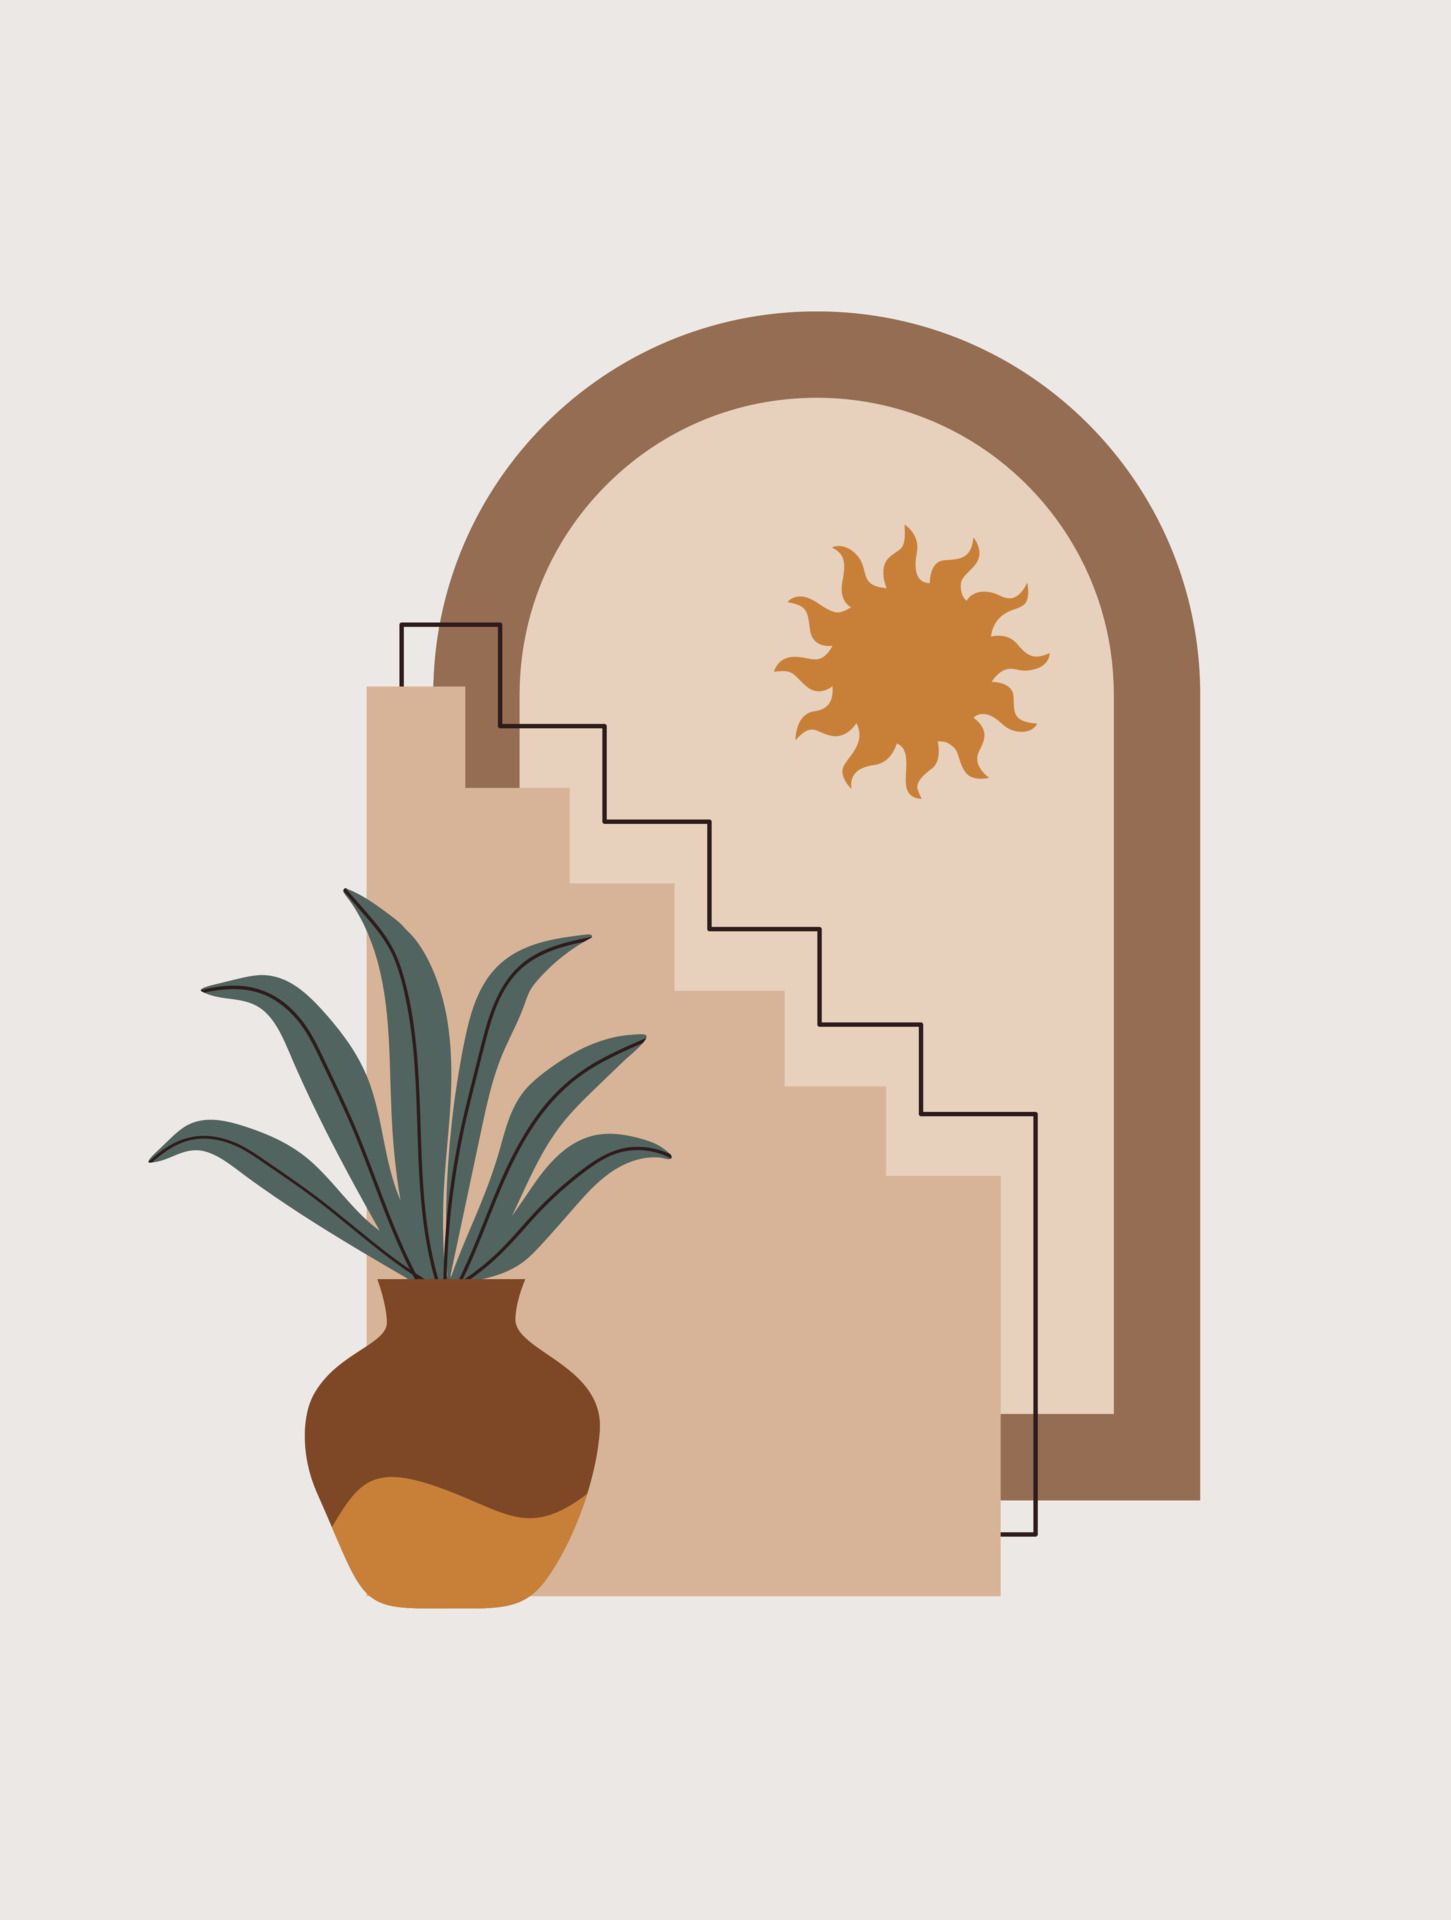 A digital drawing of a vase with a plant, a set of stairs, and a sun - Abstract, plants, boho, modern